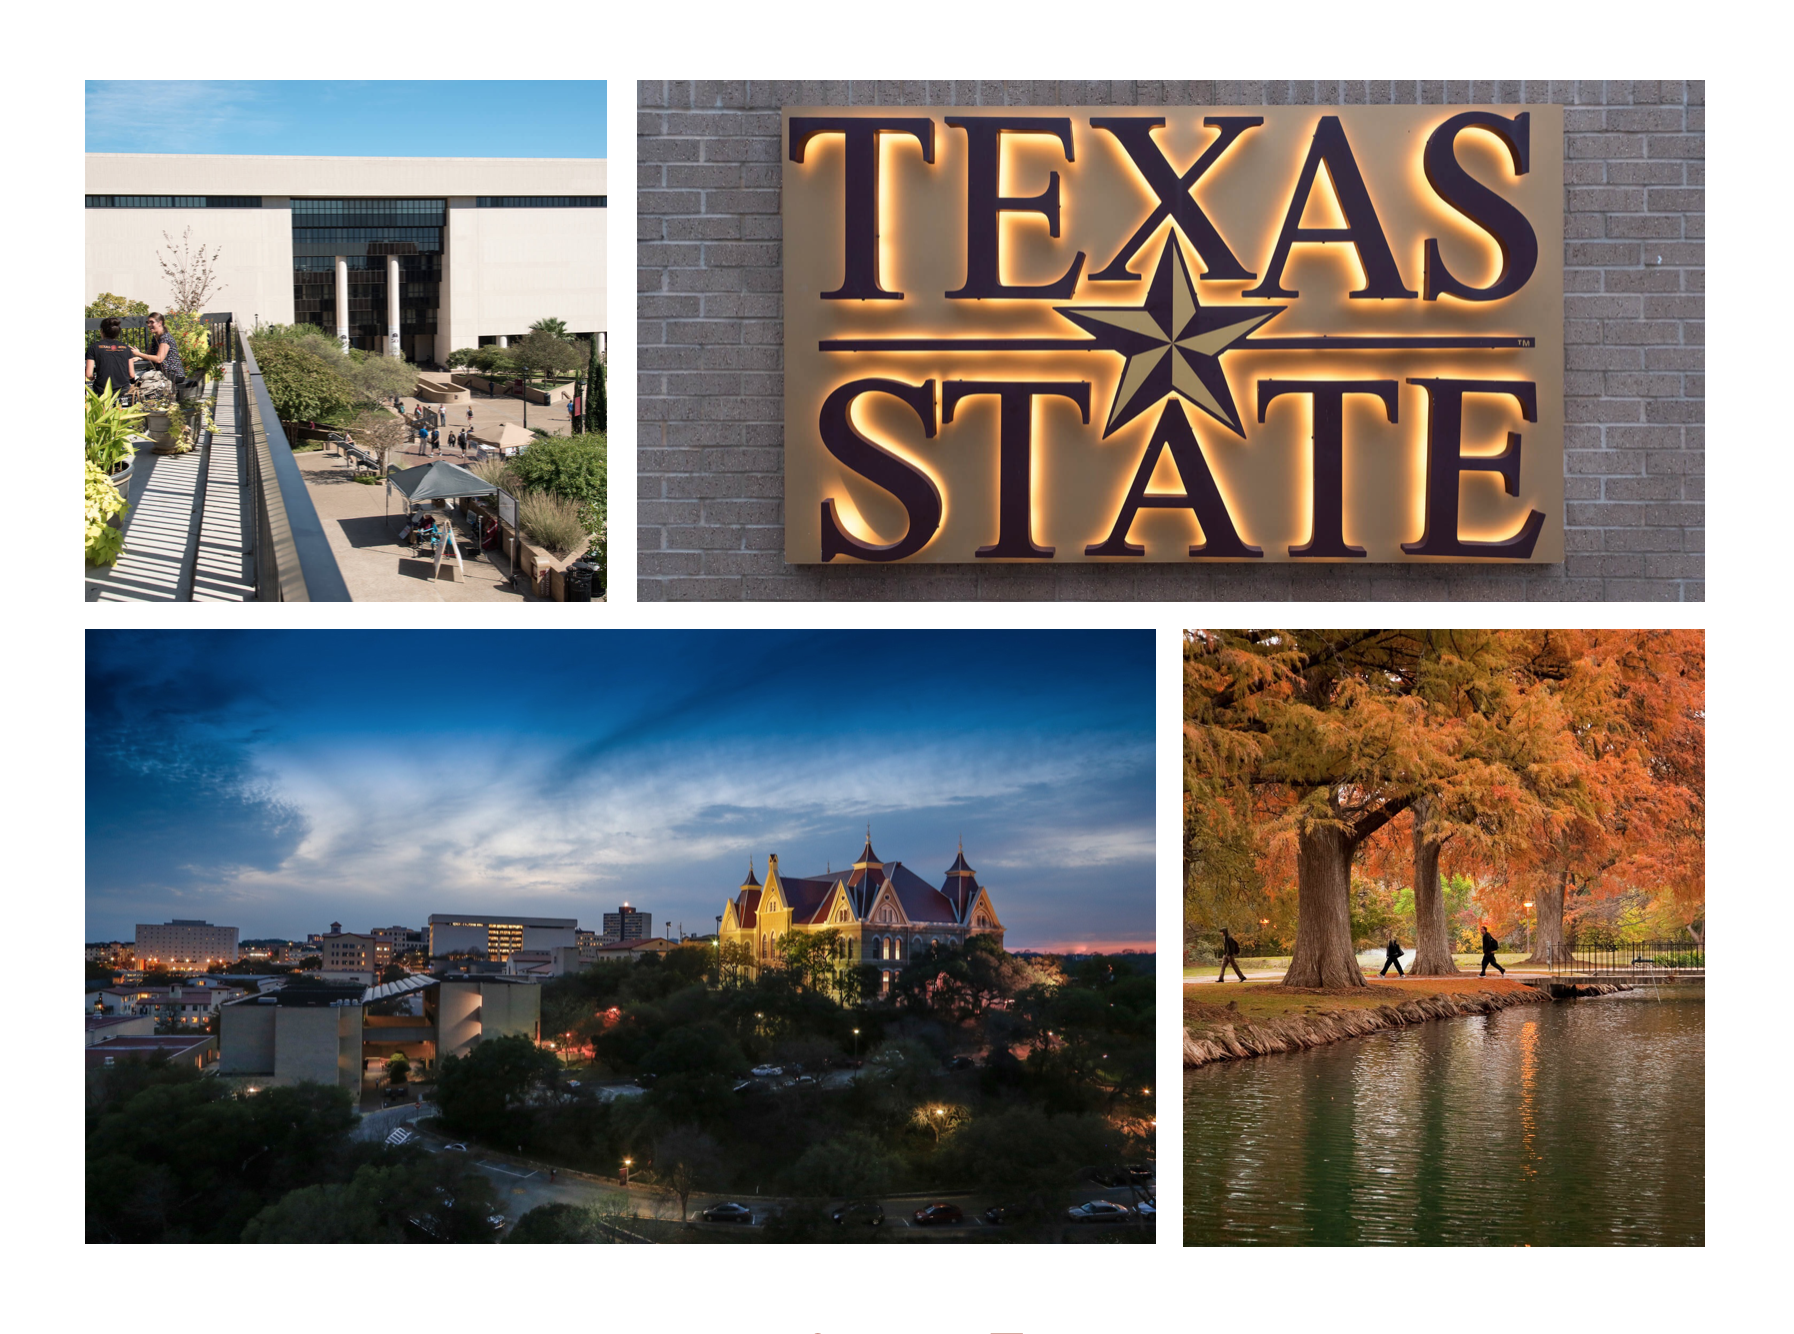 Alkek Library, TXST Quad Sign, view of campus, campus ponds